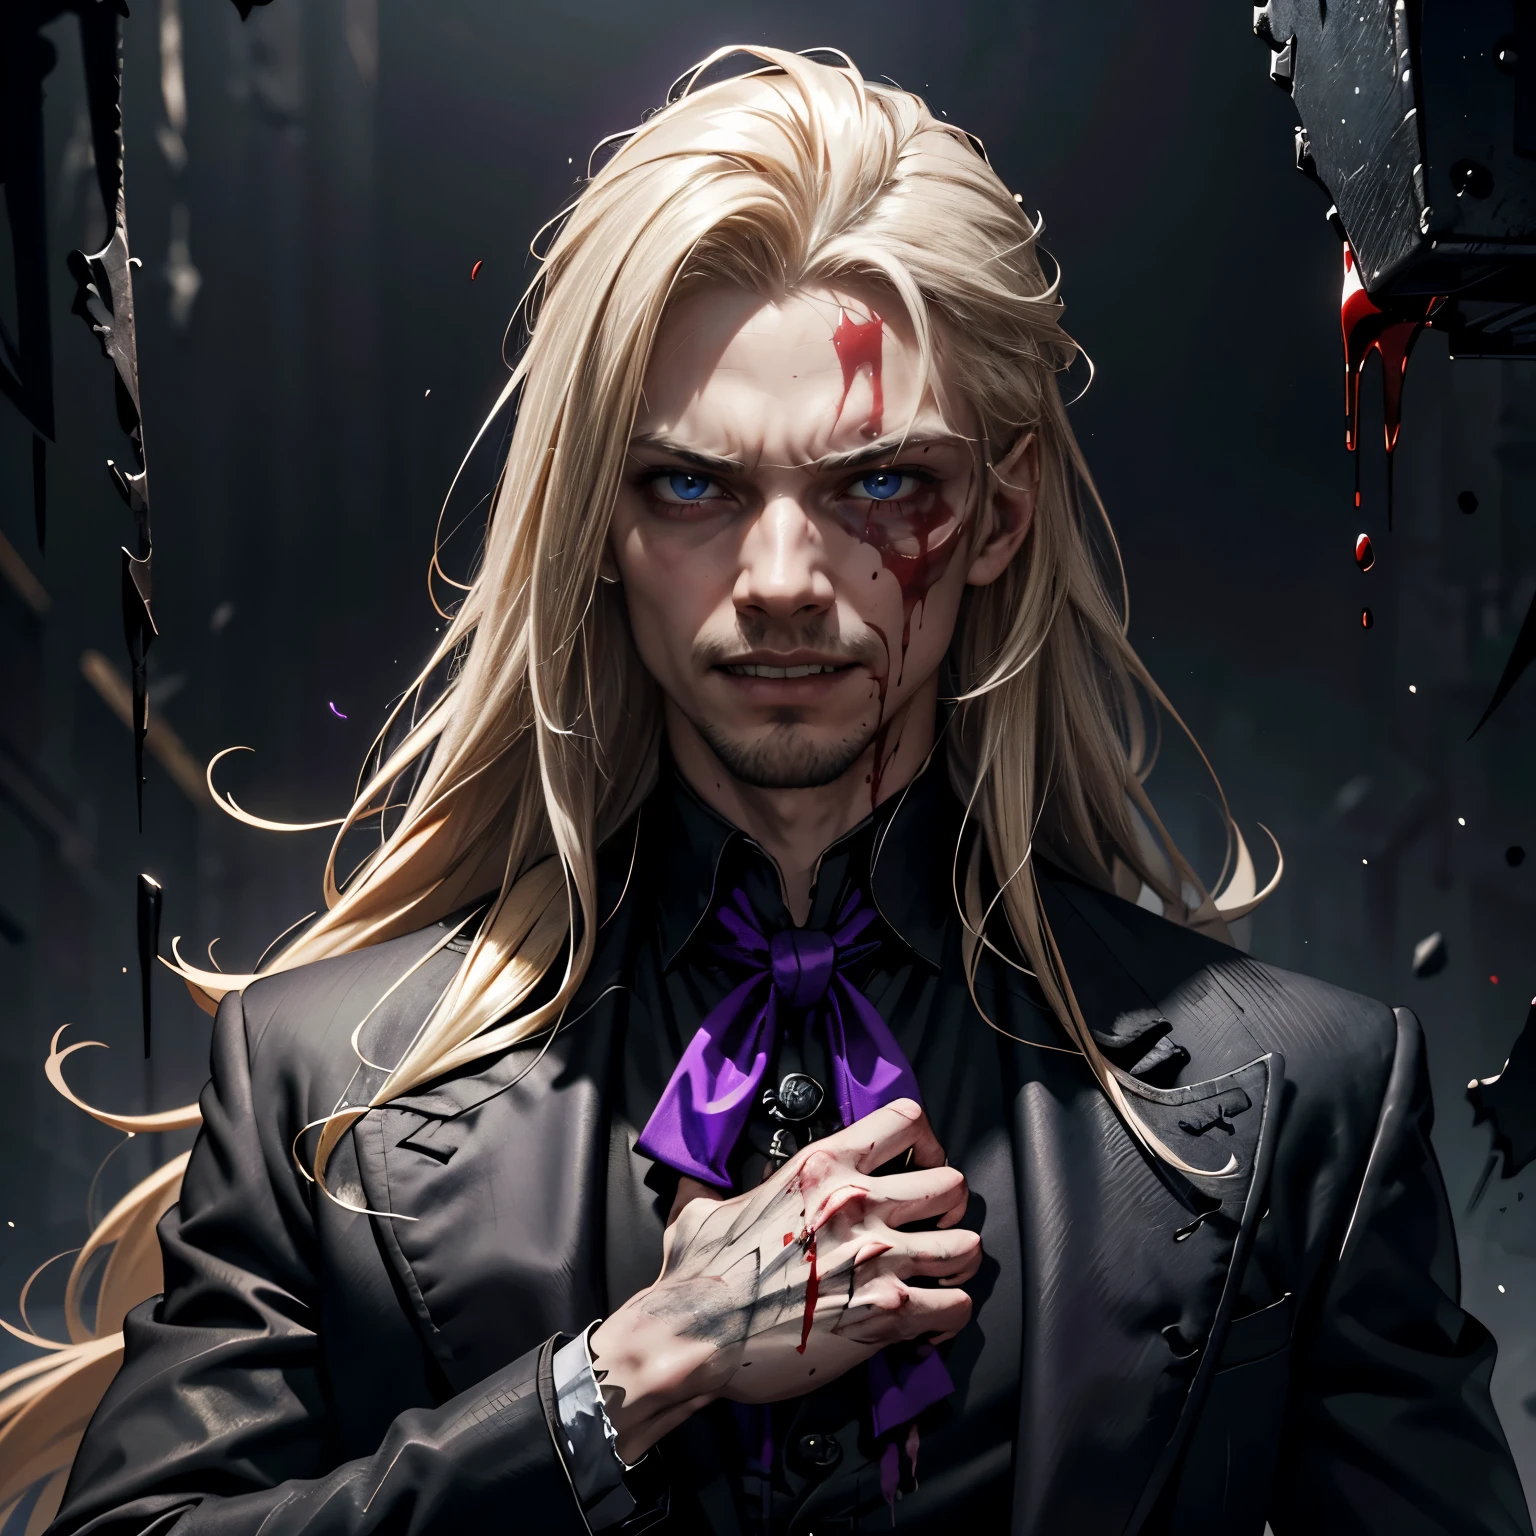 (masculine), (horrifying,shocking),blood-spattered man, male covered in blood,long flowing blond hair, , ((paled skin)) ,expressive eyes,dramatic lighting,gritty and intense,horror portrait,violent,splattered blood,dark and haunting background,close-up of face and body,bloody handprints,terrifying aura,macabre,vivid colors,high contrast, blue eyes, bloddy, masacre, androgynous, perfect face, evil smile, insane, crazy, Black coat, black suit, one young male, beautiful long hair, blond hair, blue eyes, purple victorian shirt, purple jabot, beautiful face, highest quality, wild fighting stance, blood everywhere